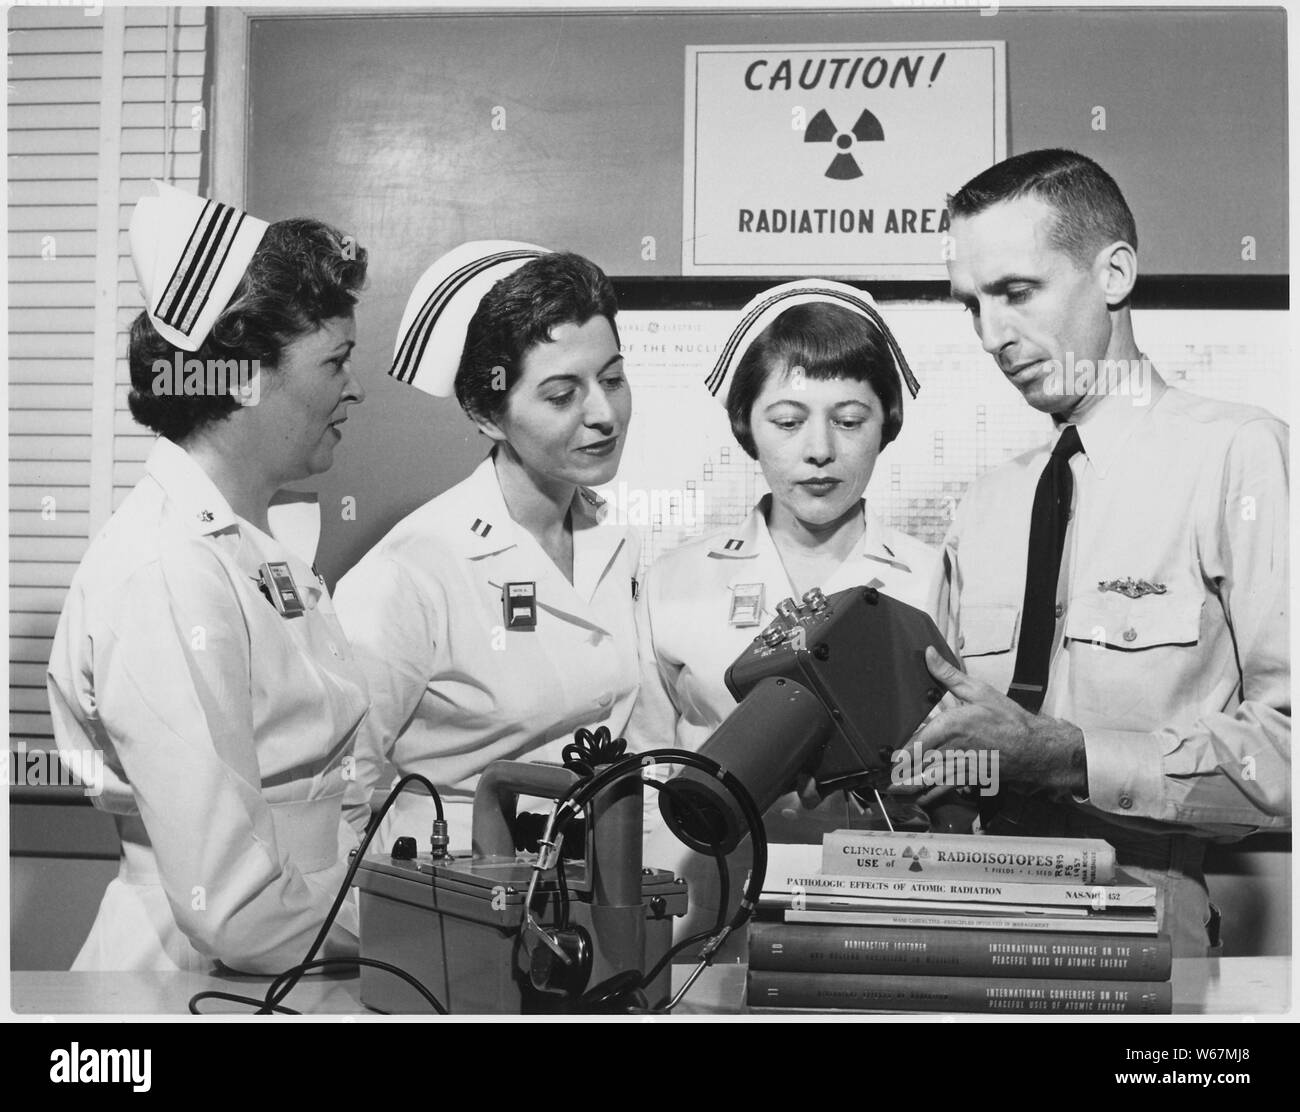 Nuclear Nursing - Chief Hospitalman Lee Jones, U.S. Navy, of Silver Spring, Maryland, demonstrates radiation survey instruments used to measure the presence of radioactivity, as part of the nuclear nursing course at the National Naval Medical Center, Bethesda, Maryland. The nurses left to right are: Lieutenant Commander Anne Check, Perth Amboy, New Jersey; Lieutenant Margaret M. Smith, Riverdale, New York, and Lieutenant Lina D. Murasheff, Richmond, California Stock Photo